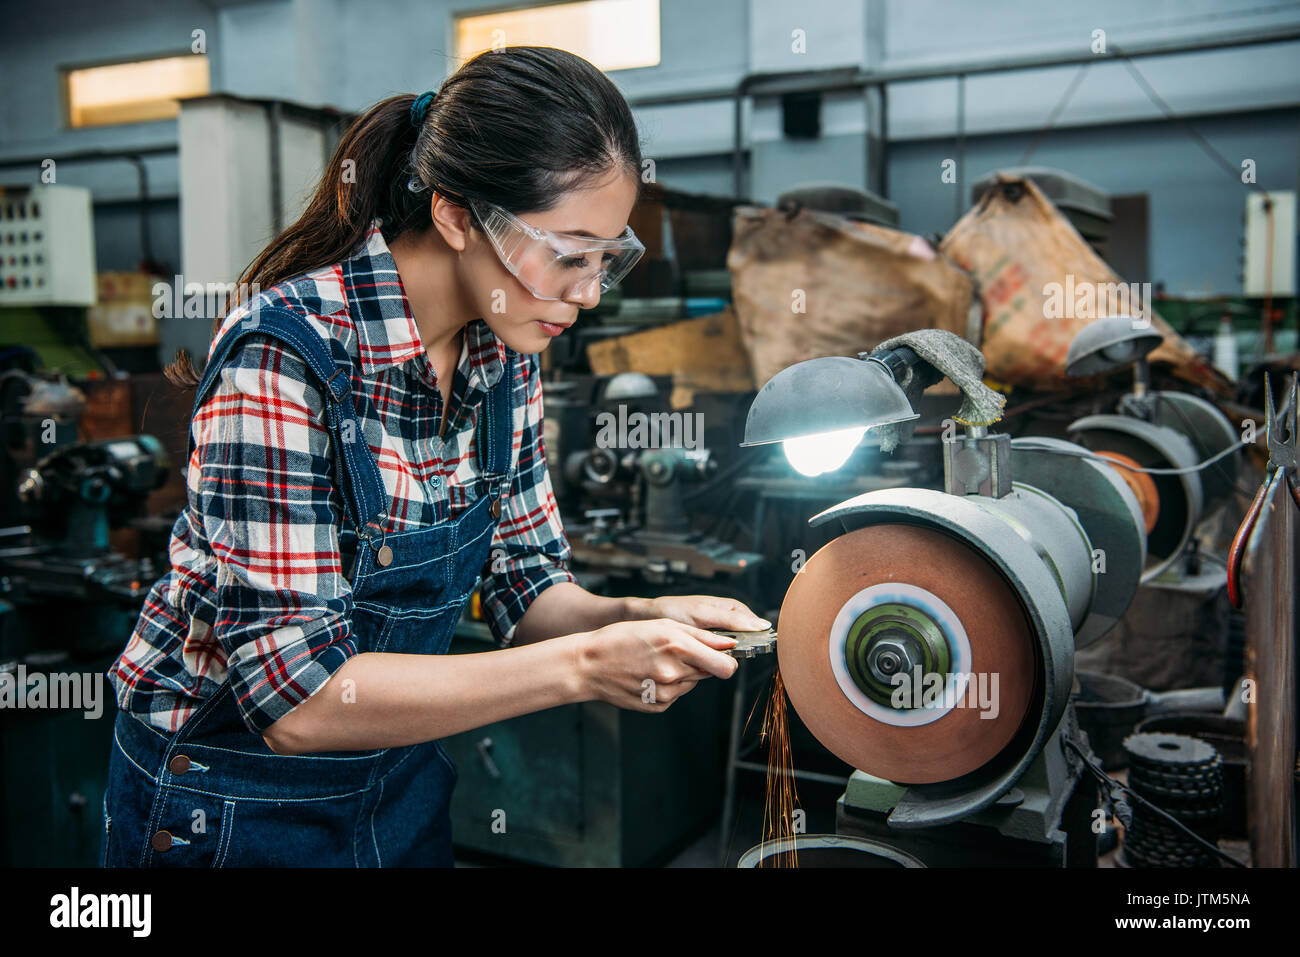 attractive lathe female worker holding components metal grinding and wearing safety glasses working on grinding wheel with sparks in milling machine w Stock Photo